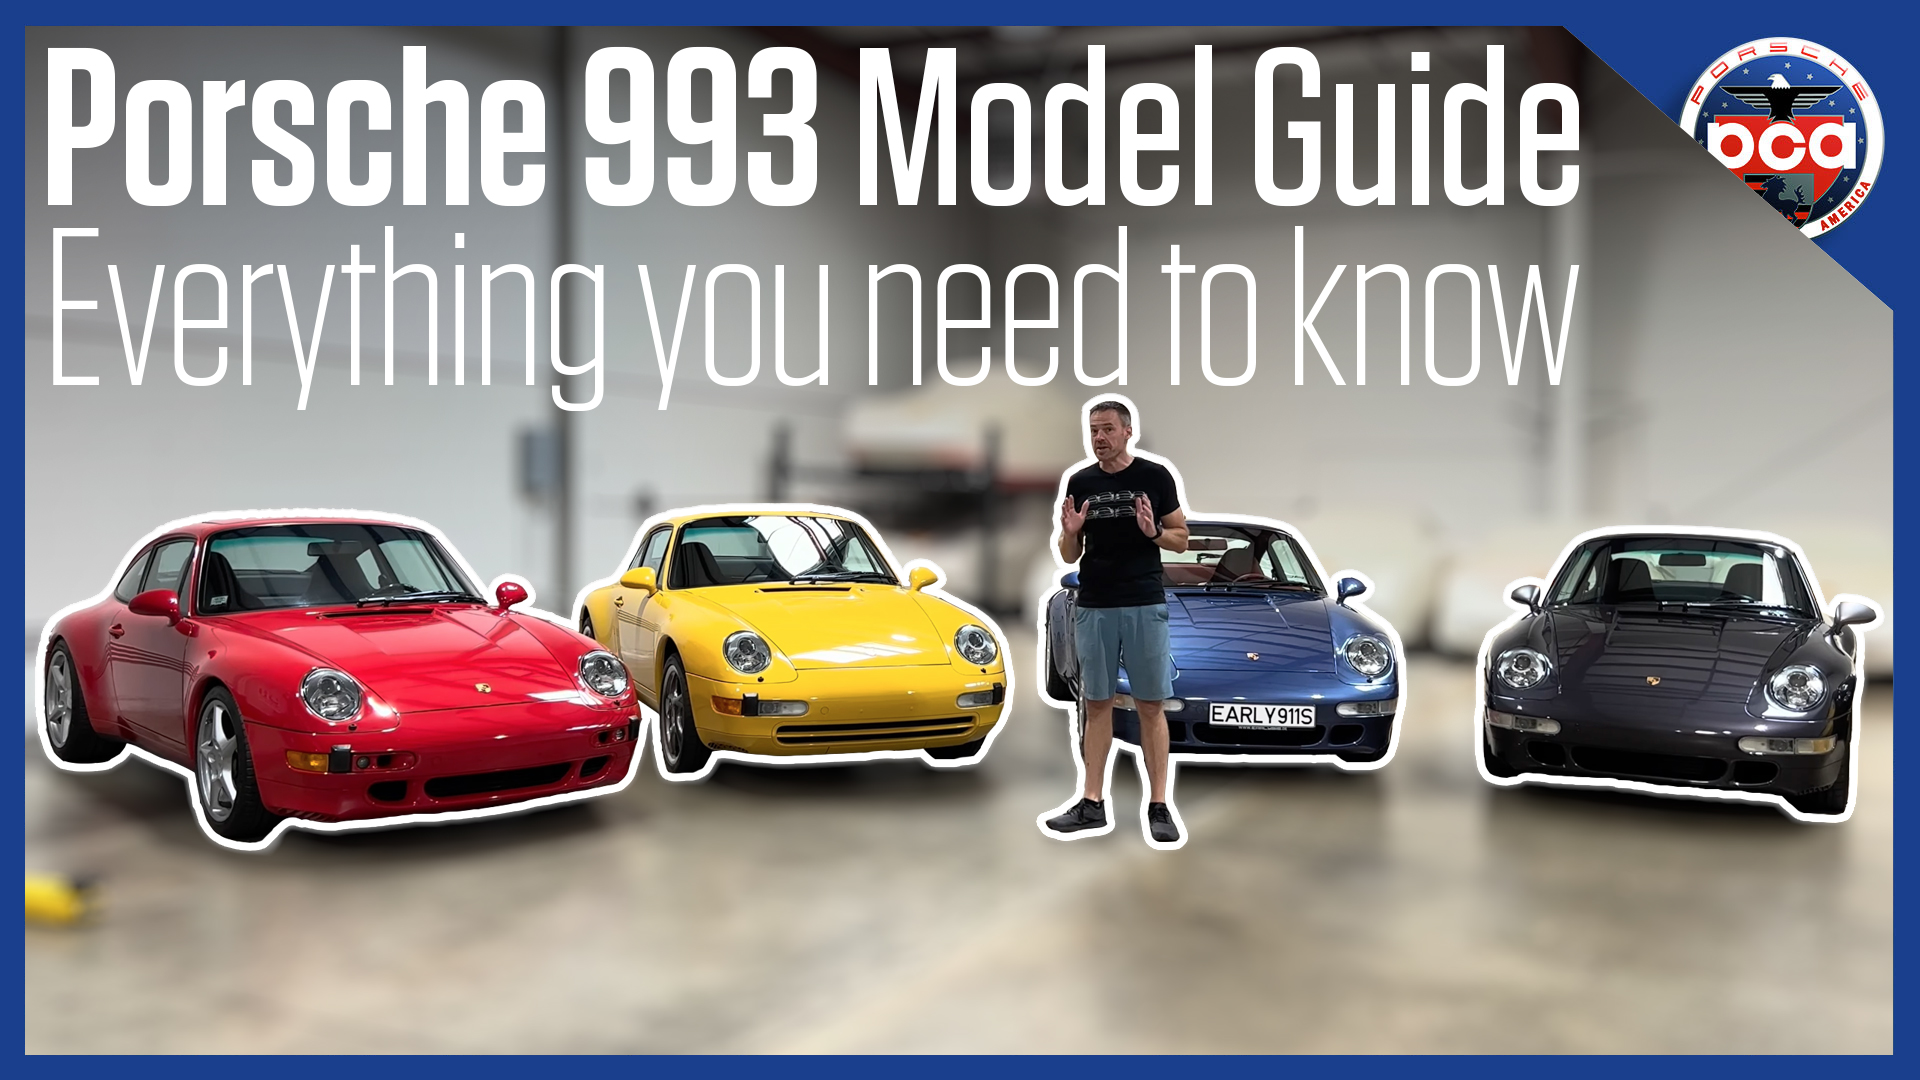 Porsche Club of America - Porsche 993 Model Guide: Everything you need to know